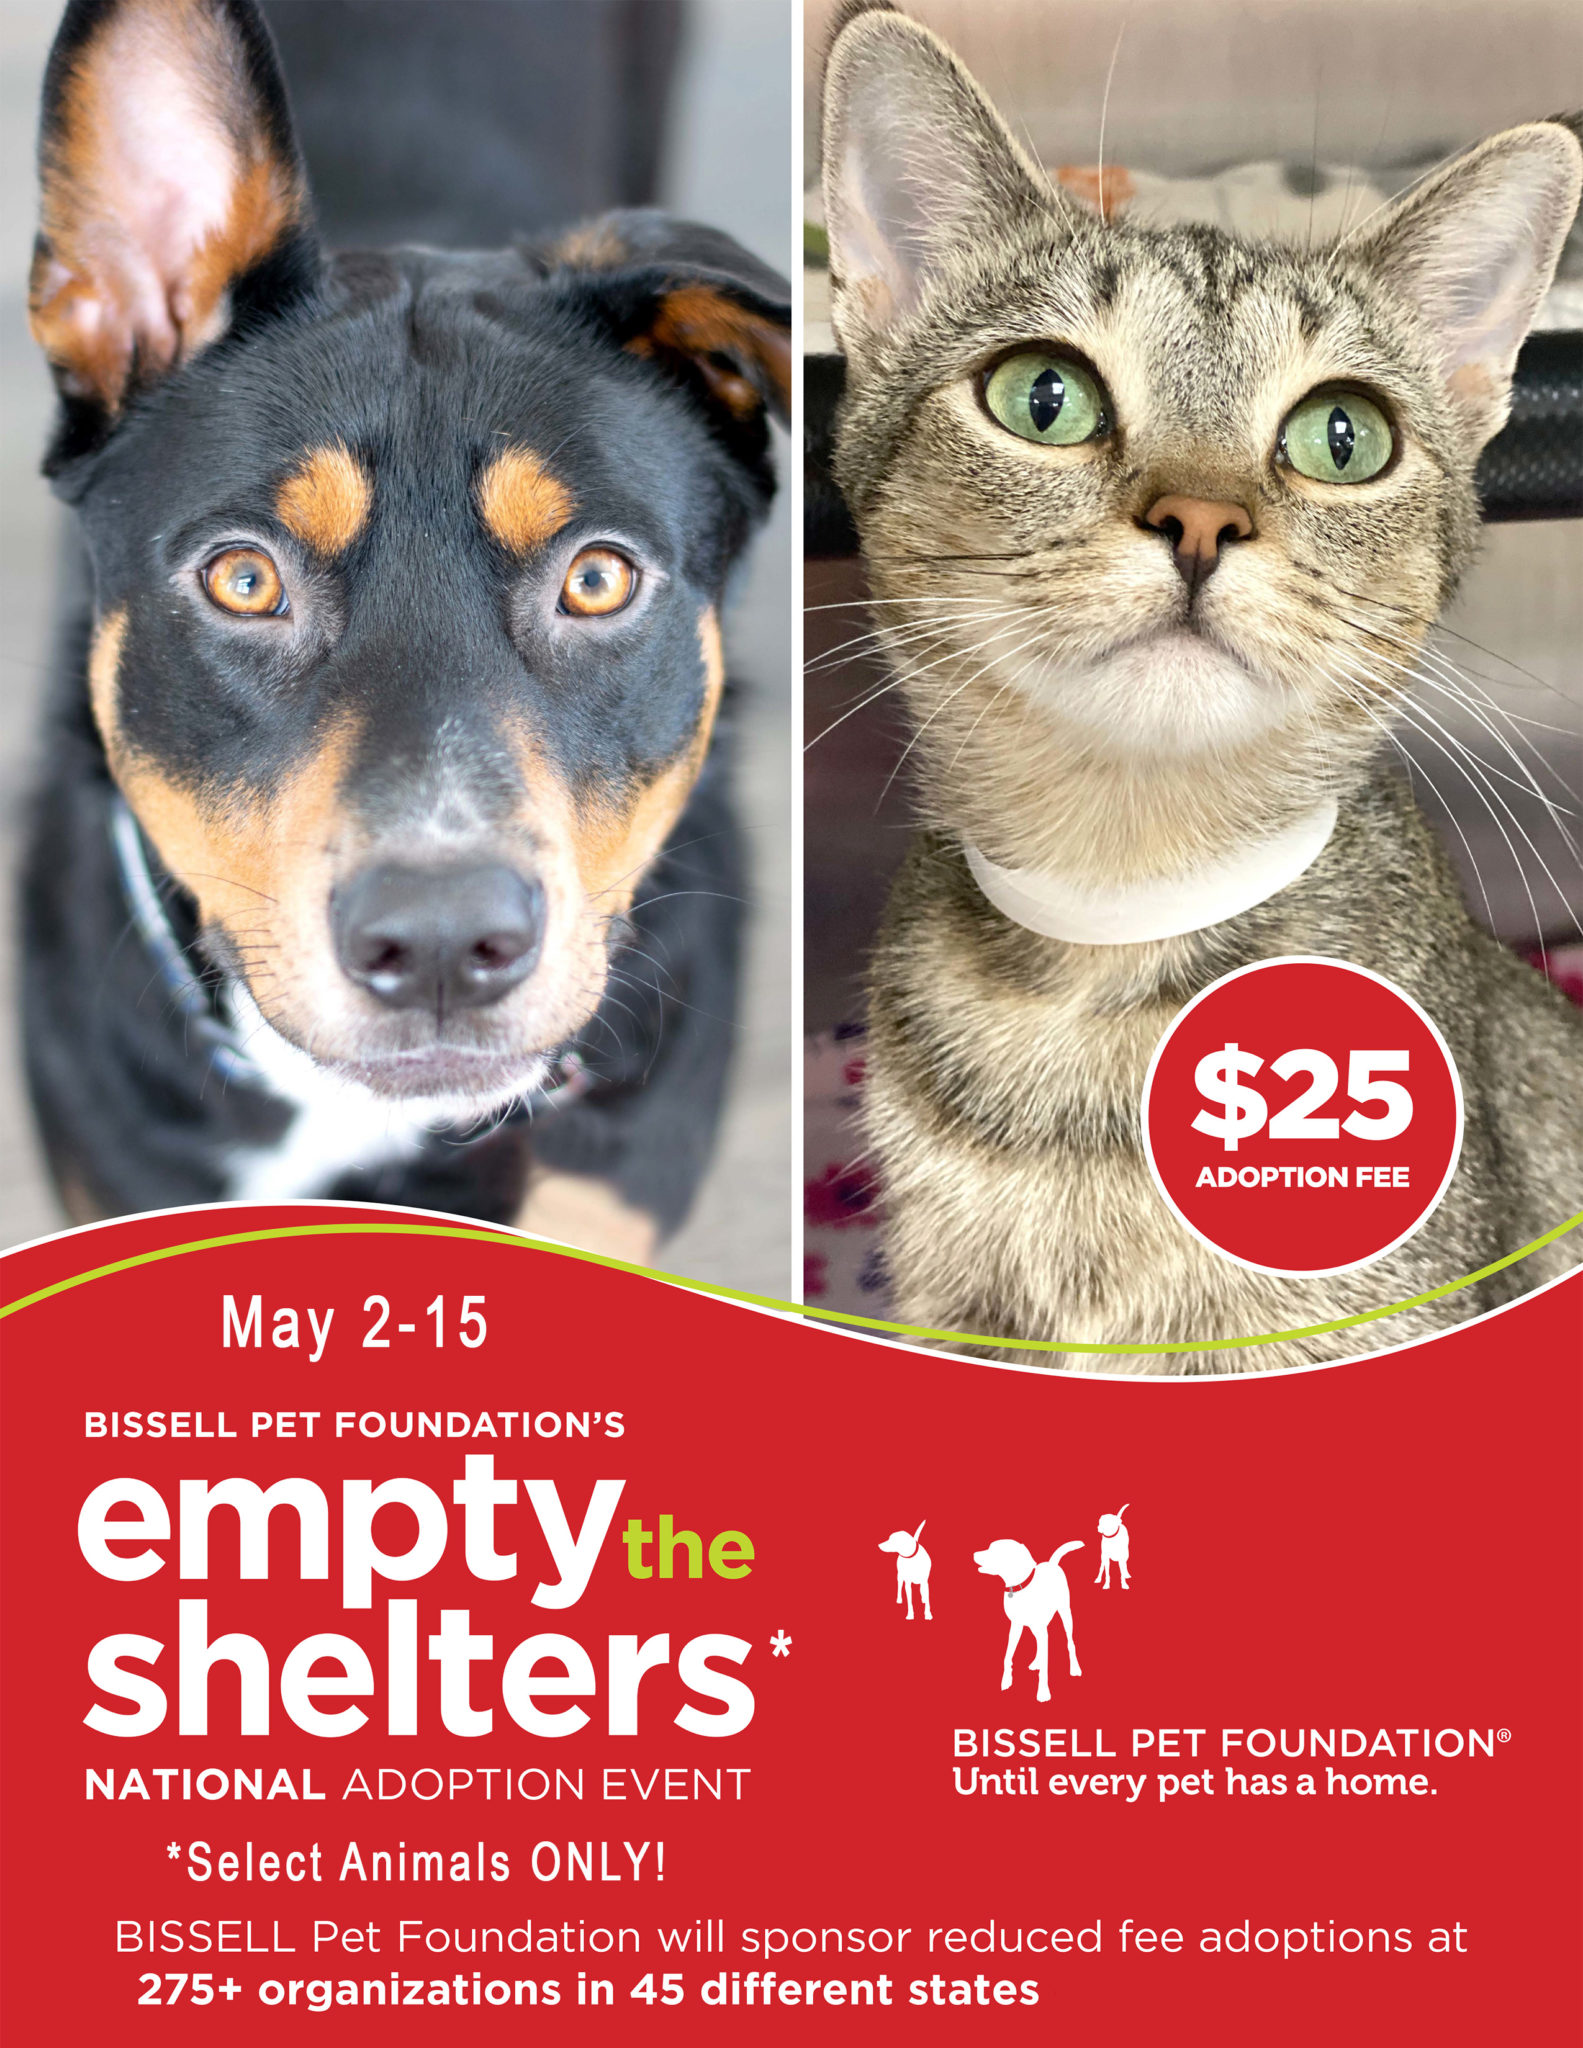 Bissell Pet Foundation's Clear the Shelters Animal House Shelter